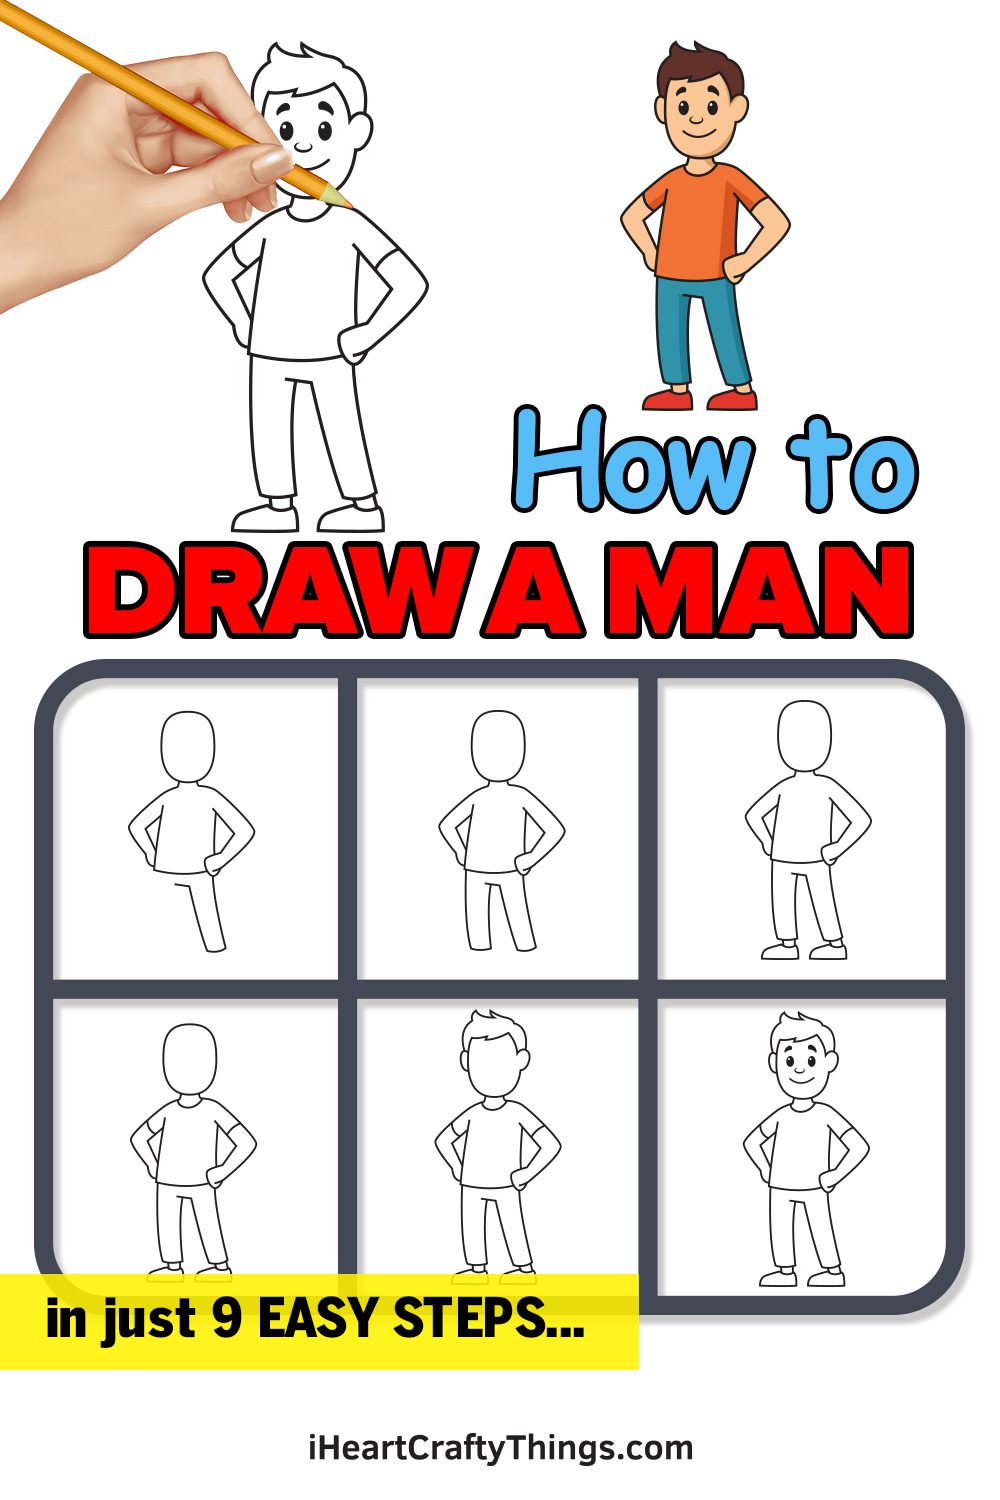 A tutorial is shown for how to draw a man. A hand is shown drawing the outline next to a finished, colored version. 